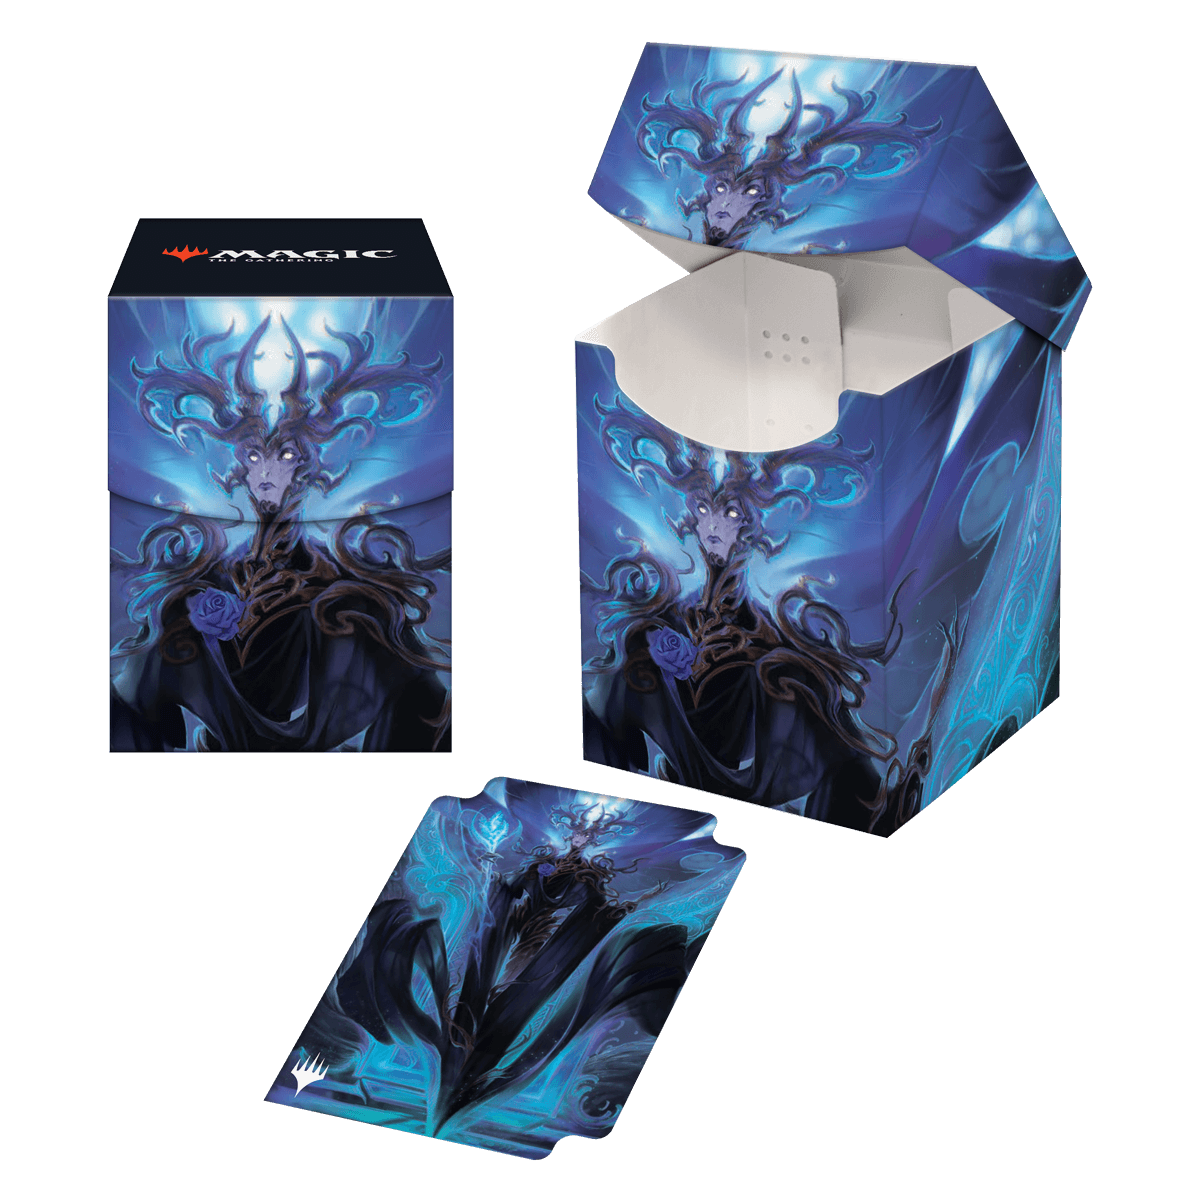 Wilds of Eldraine Talion, the Kindly Lord (Borderless) 100+ Deck Box for Magic: The Gathering | Ultra PRO International